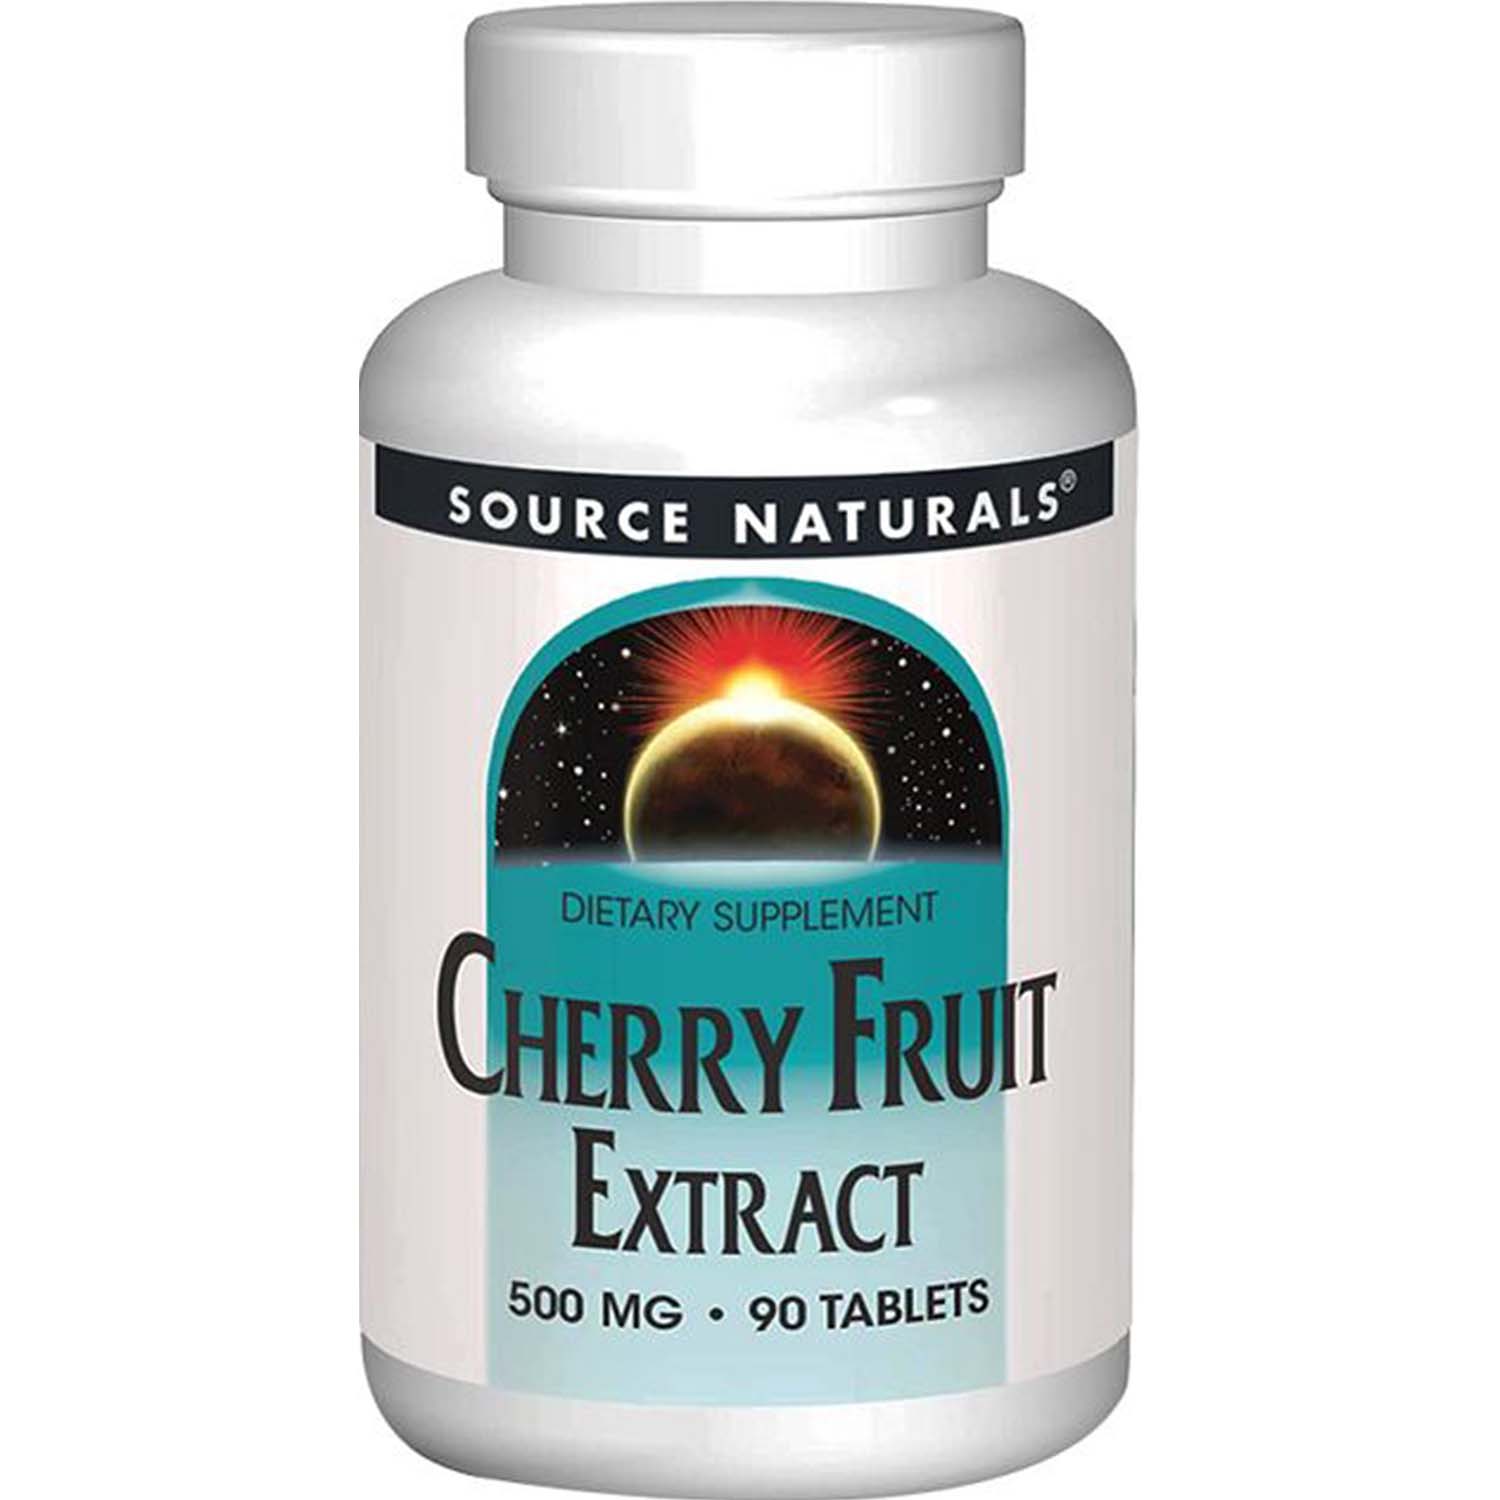 Source Naturals Cherry Fruit Extract 90 Tablets 500 mg